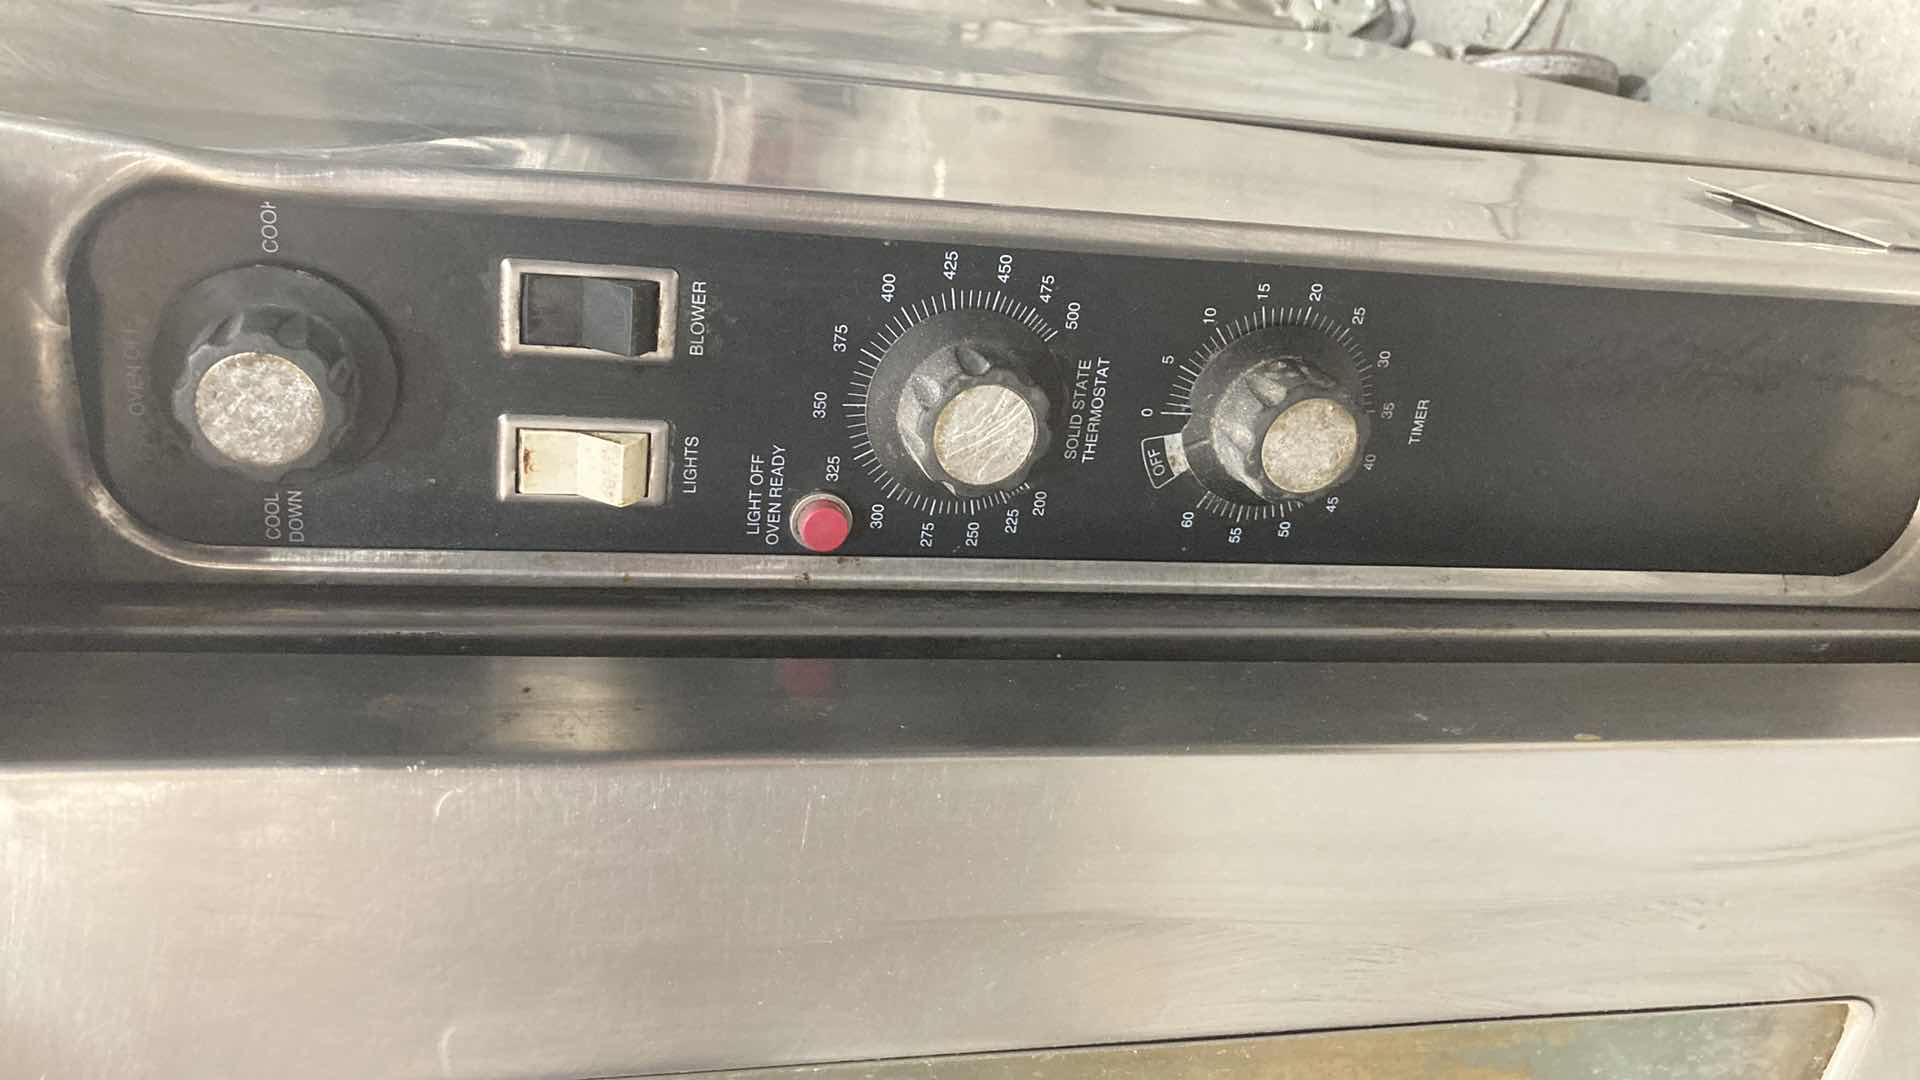 Photo 5 of BLODGETT 2 TIER COMMERCIAL CONVECTION OVEN (ELECTRICAL SHORT)